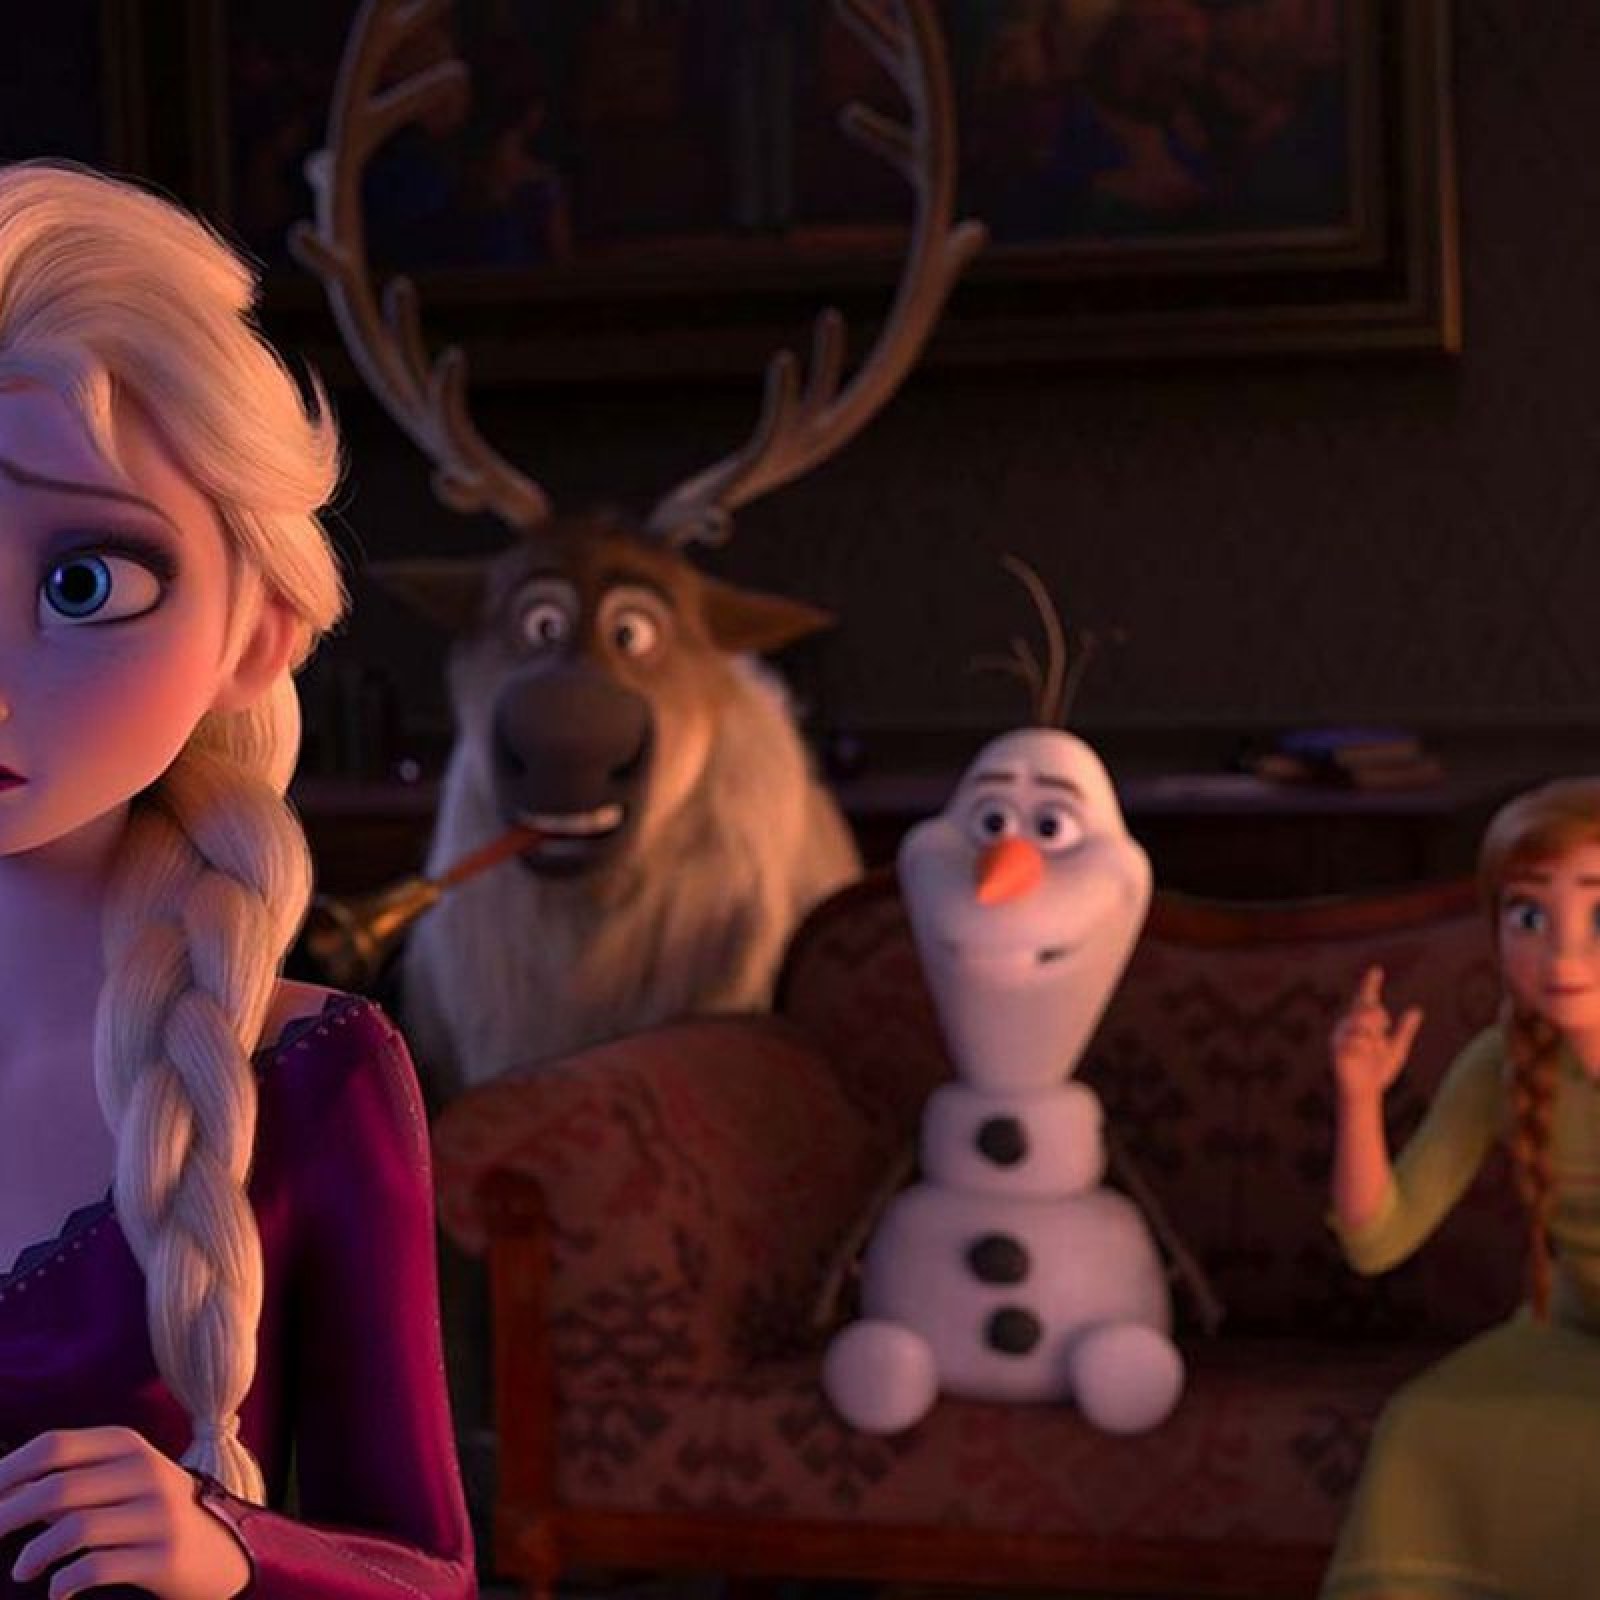 When Is Frozen 2 Coming To Disney Plus Release Date Revealed